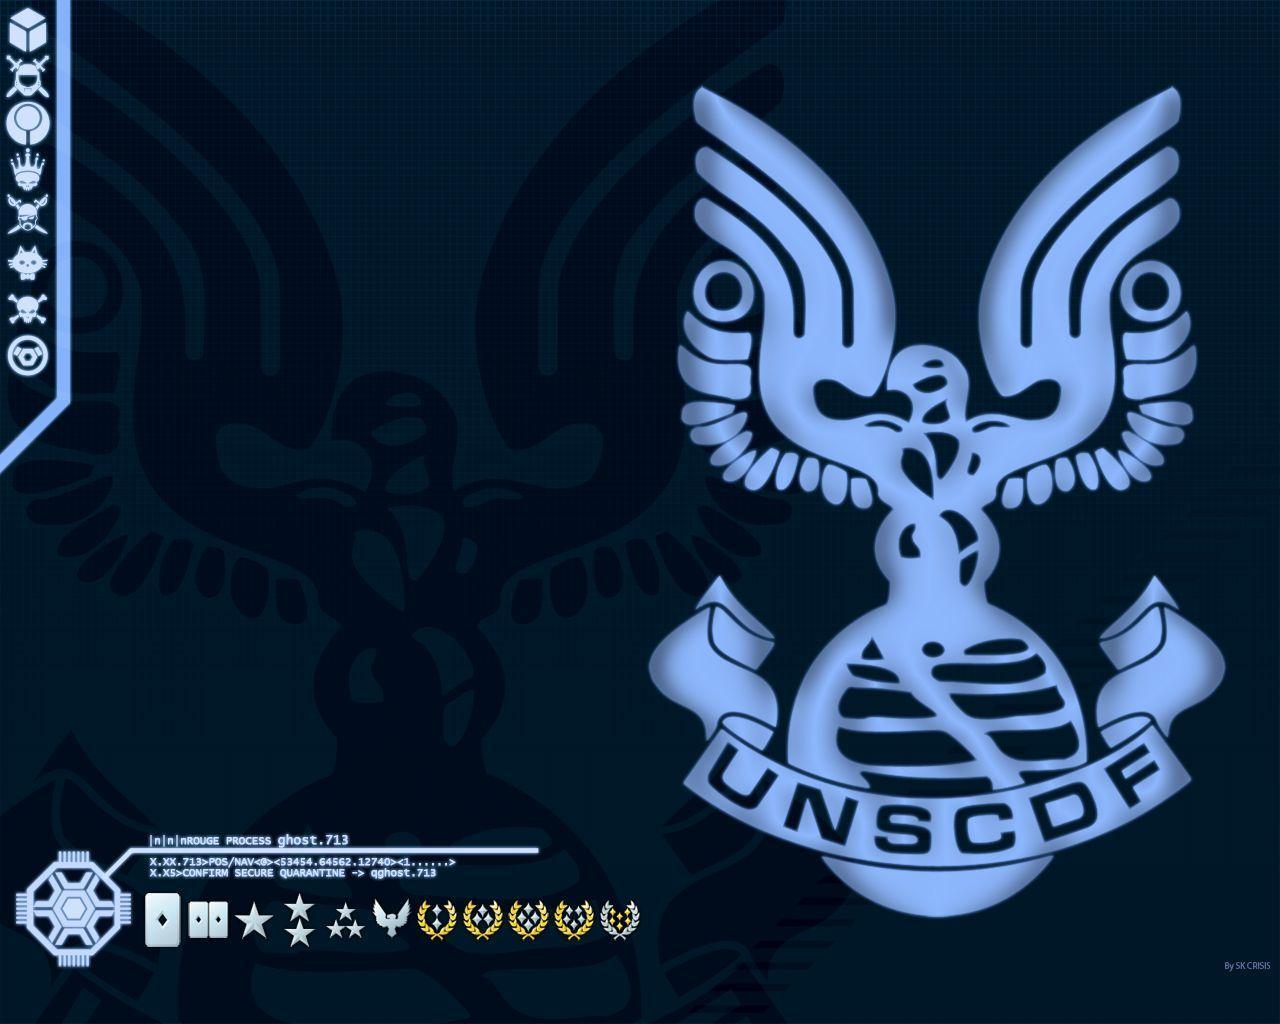 Halo Unsc Logobungienet Halo Forum Official Unscdf Wallpapers